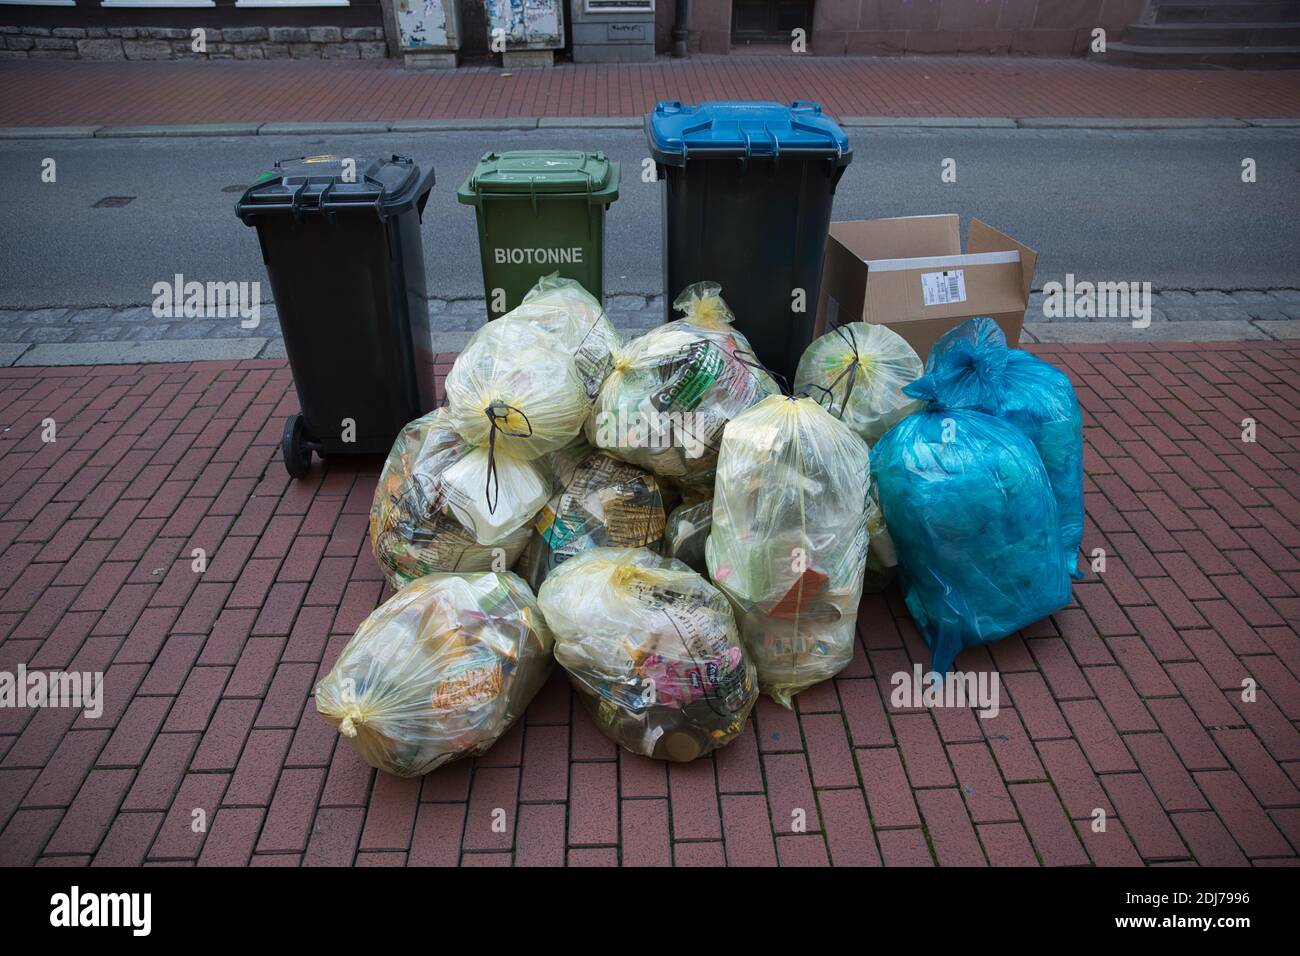 Plastic garbage bags and bins with recycling on paved sidewalk. Front view. Stock Photo